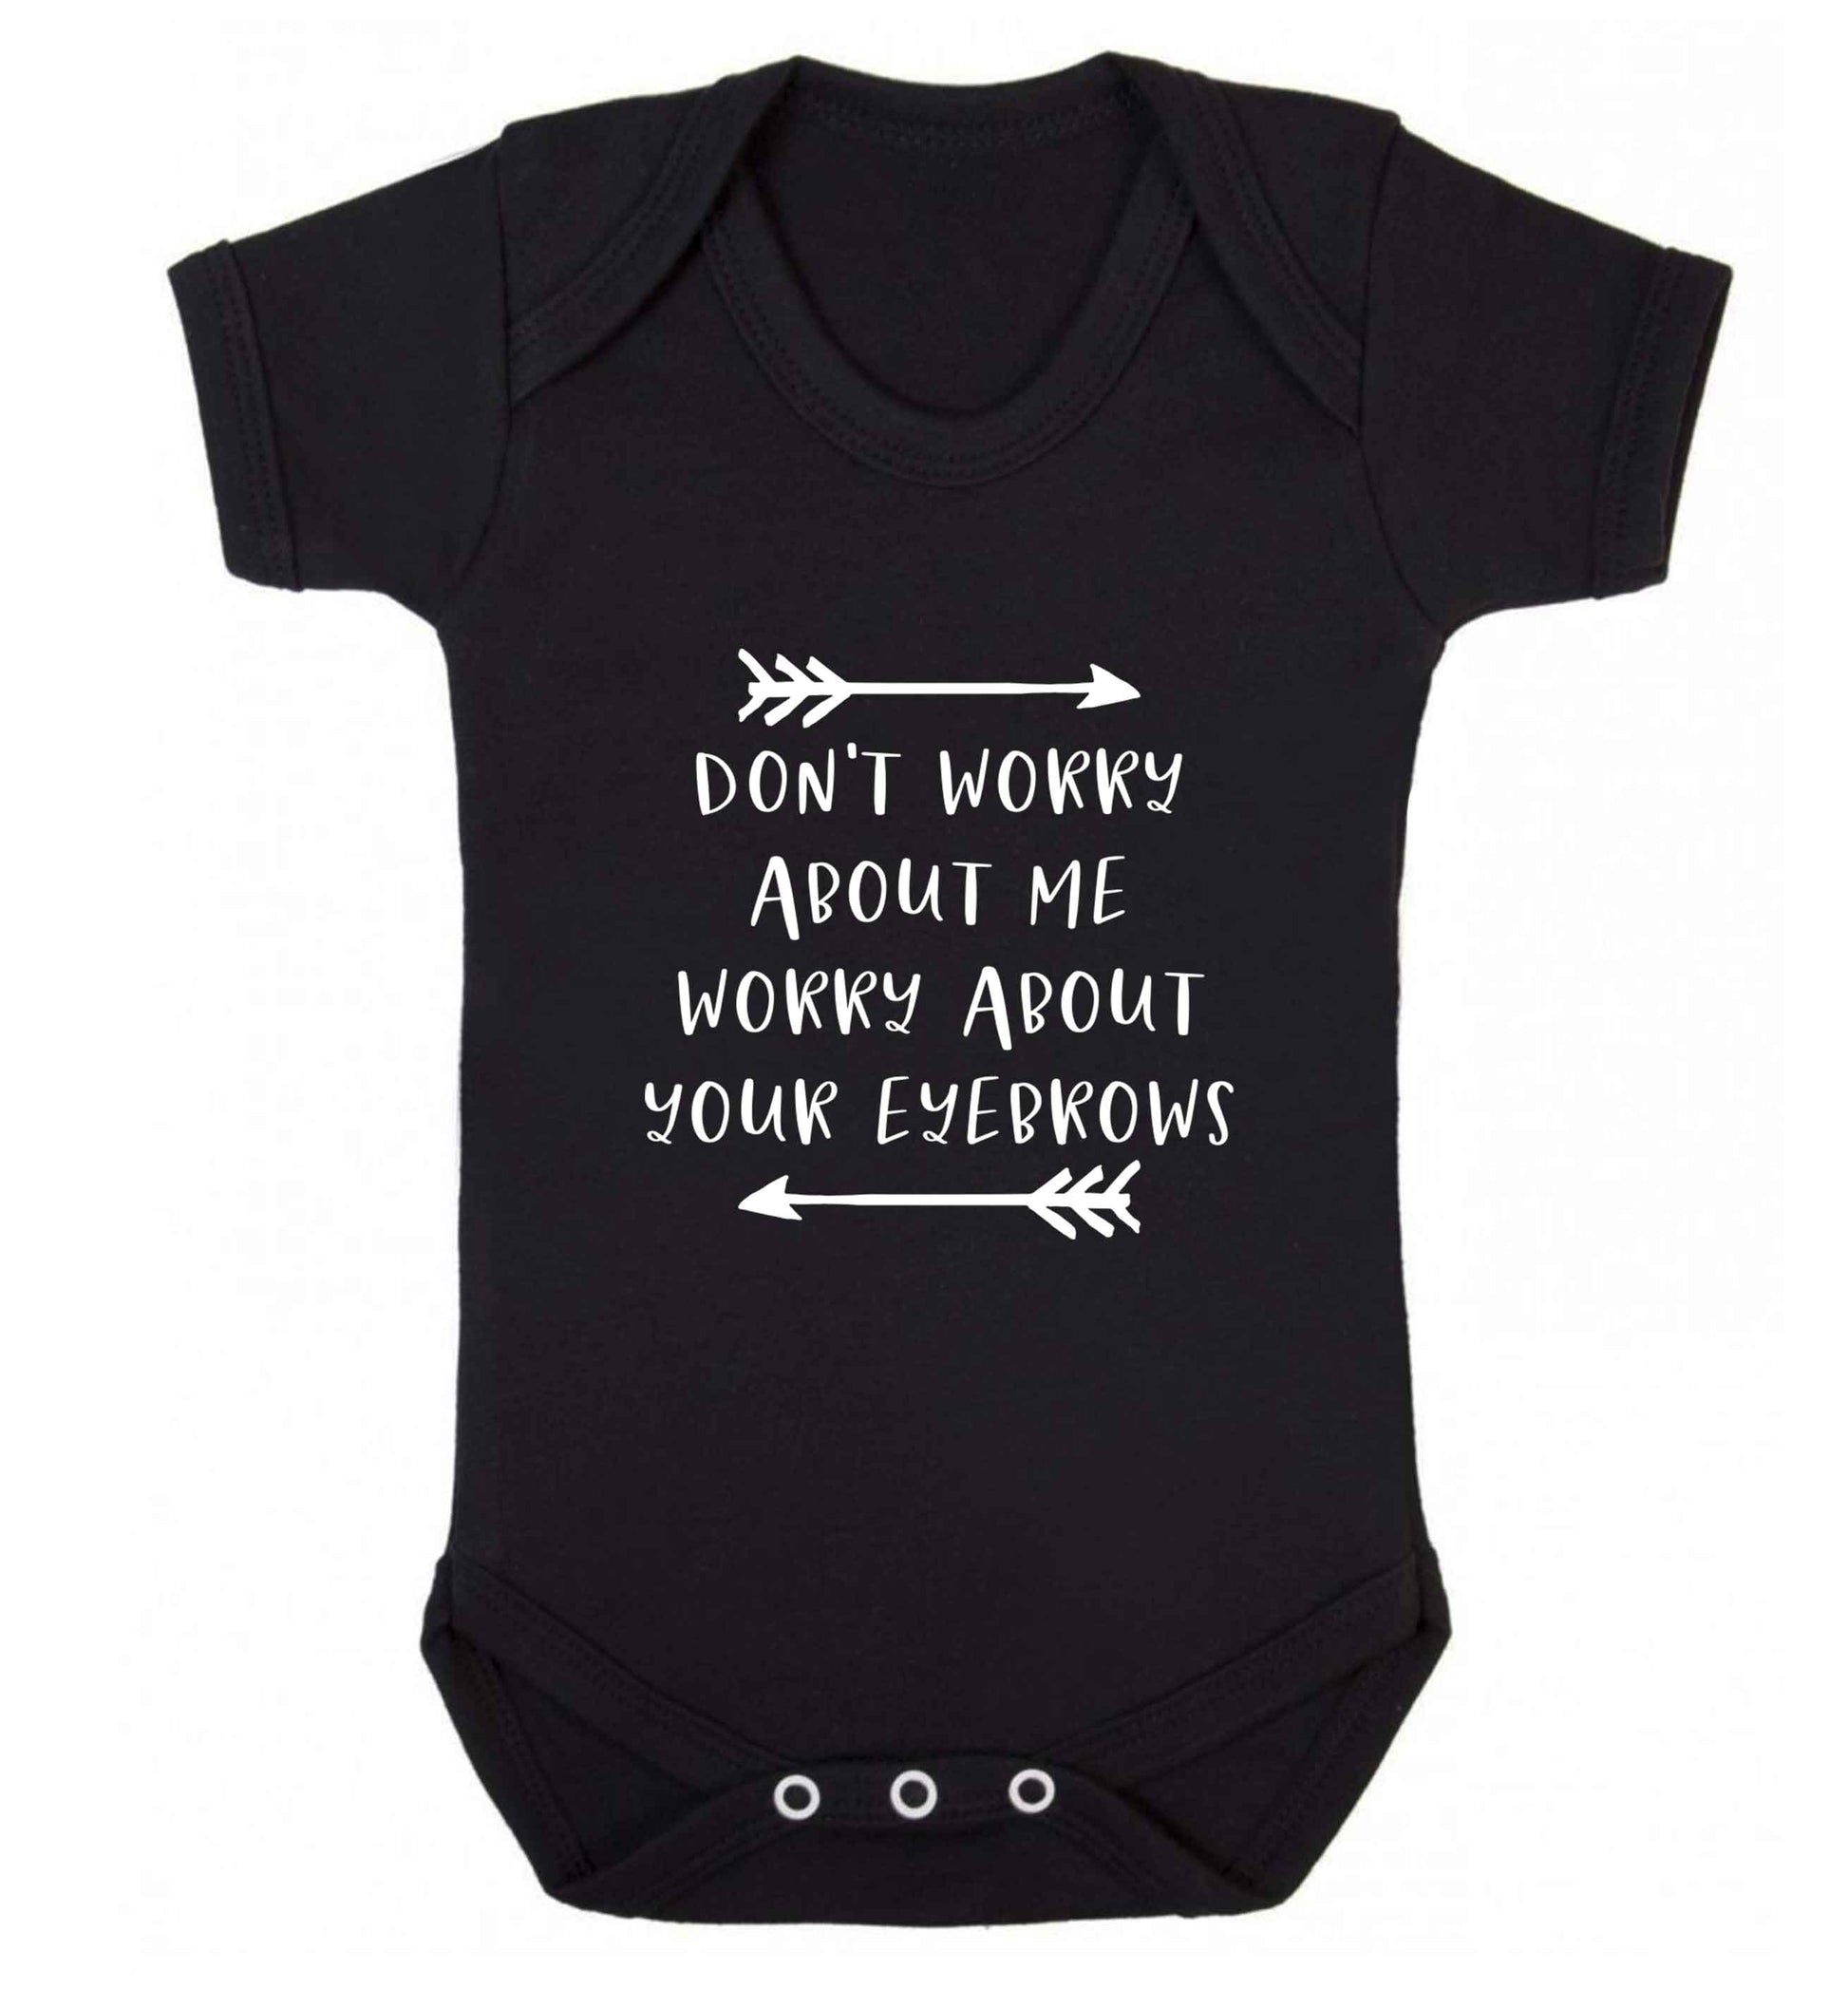 Don't worry about me worry about your eyebrows baby vest black 18-24 months